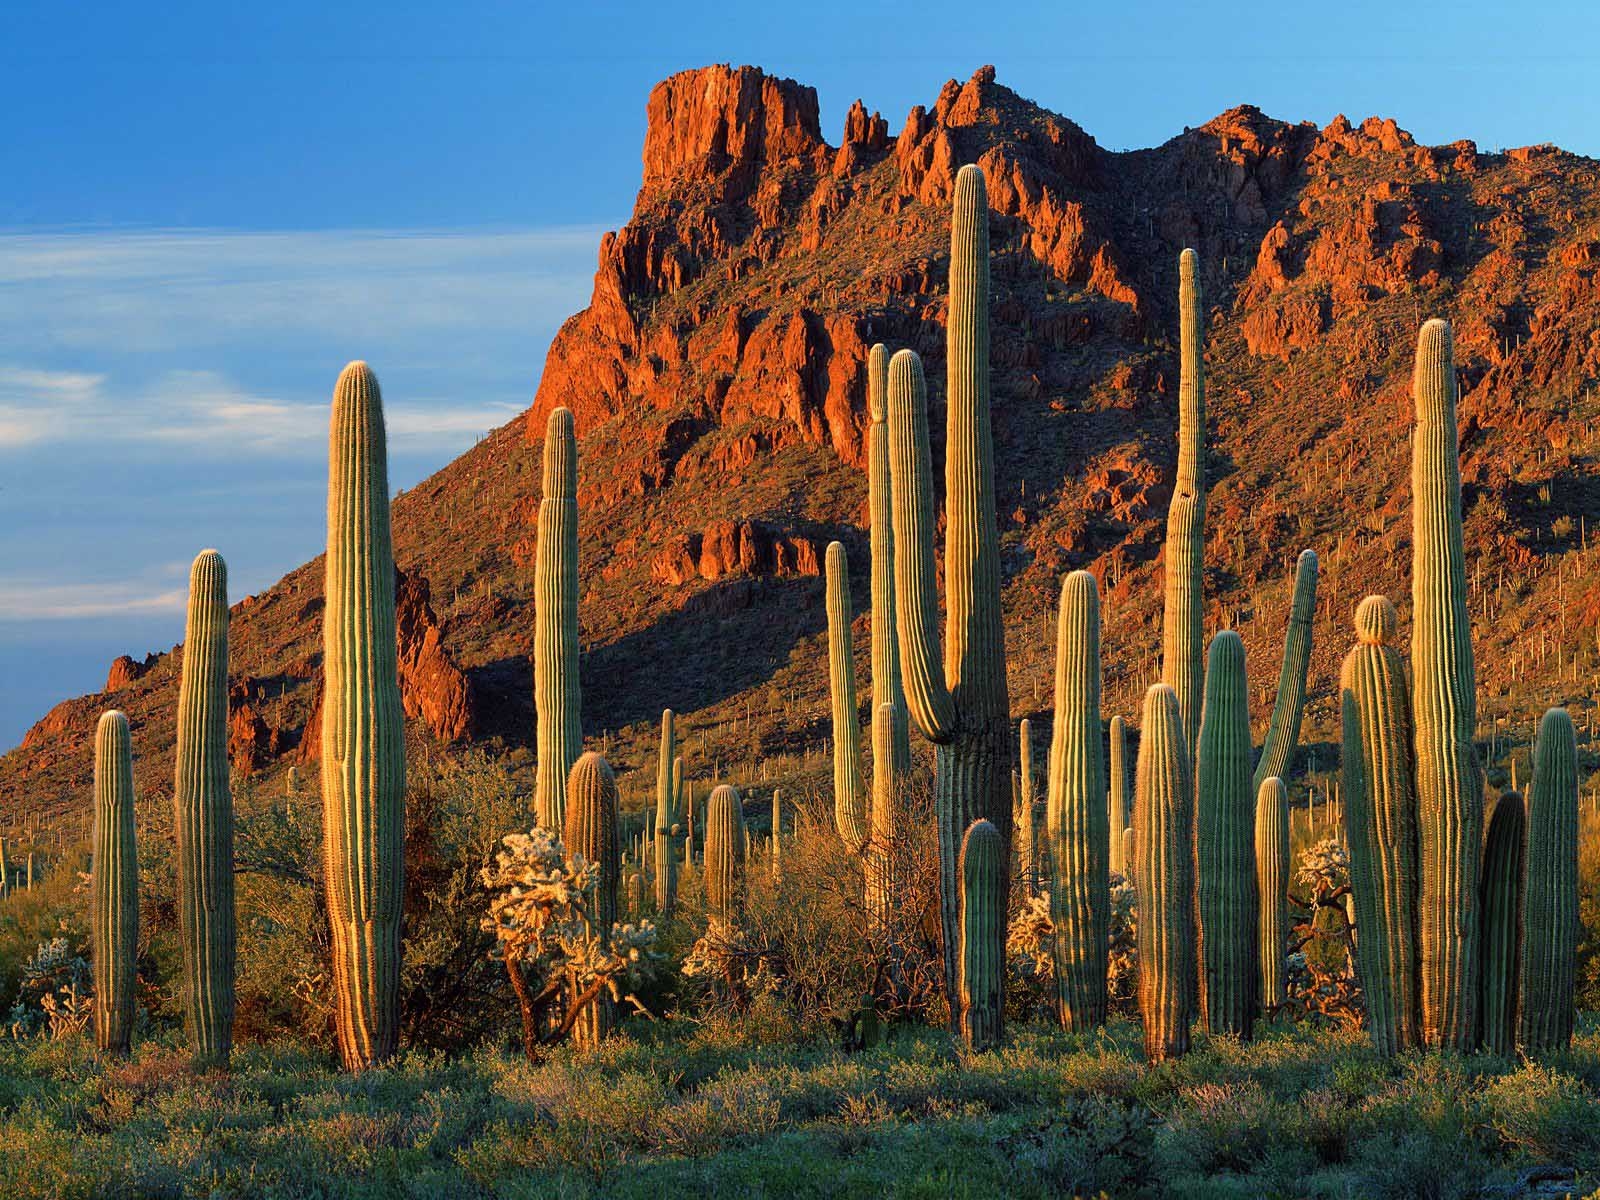 Arizona's Economy Poised For Continued Growth | Office of the ...